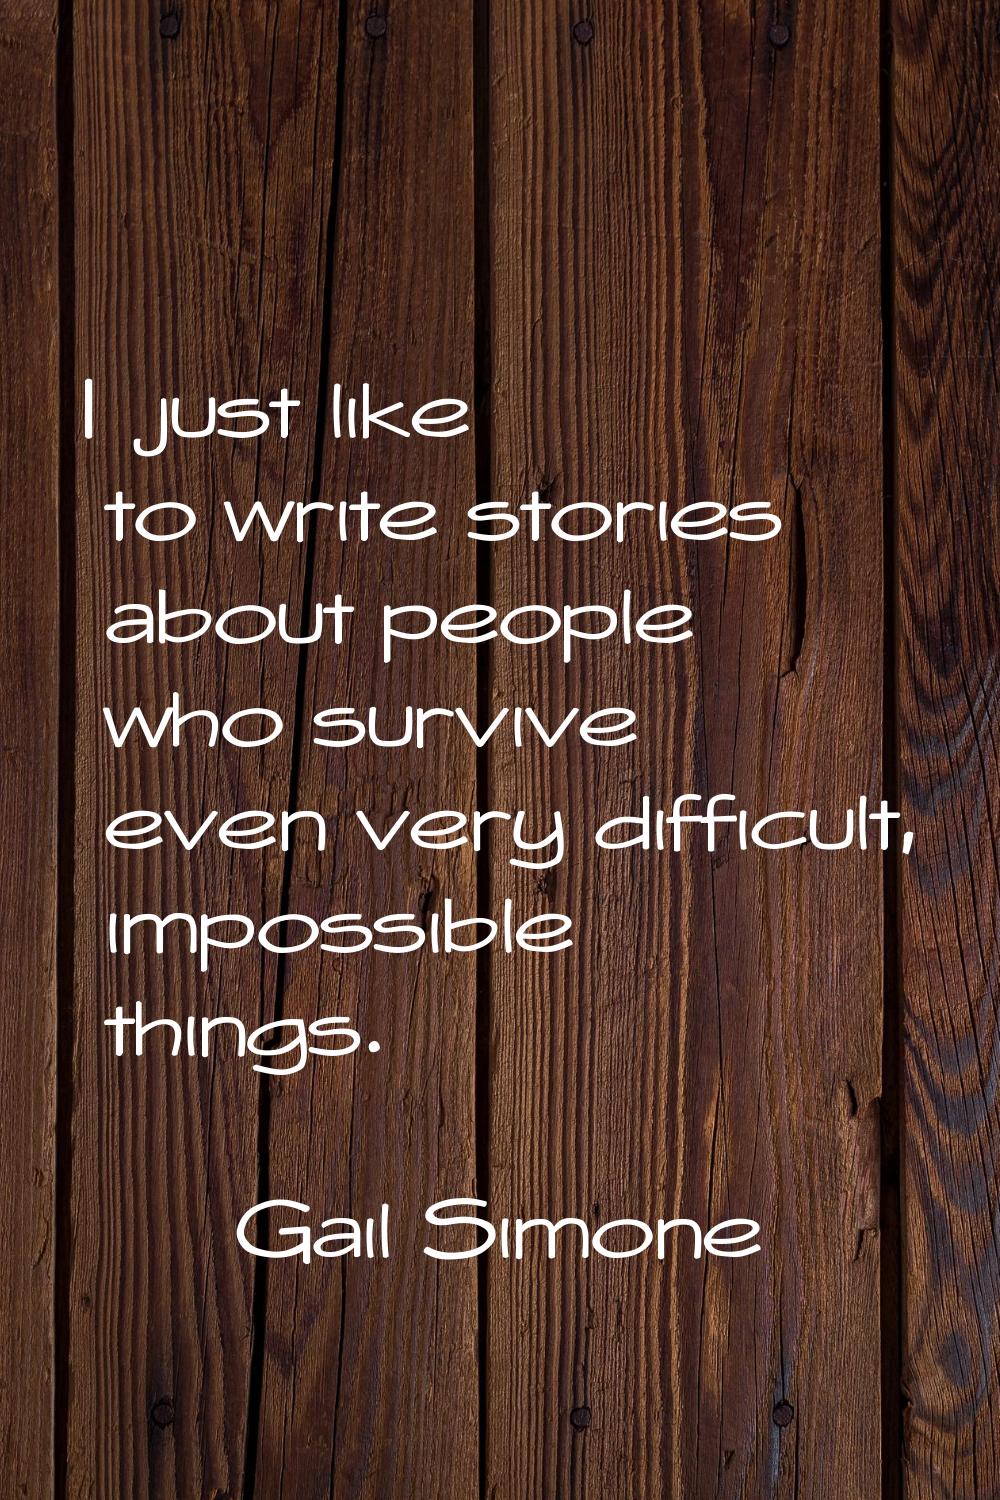 I just like to write stories about people who survive even very difficult, impossible things.